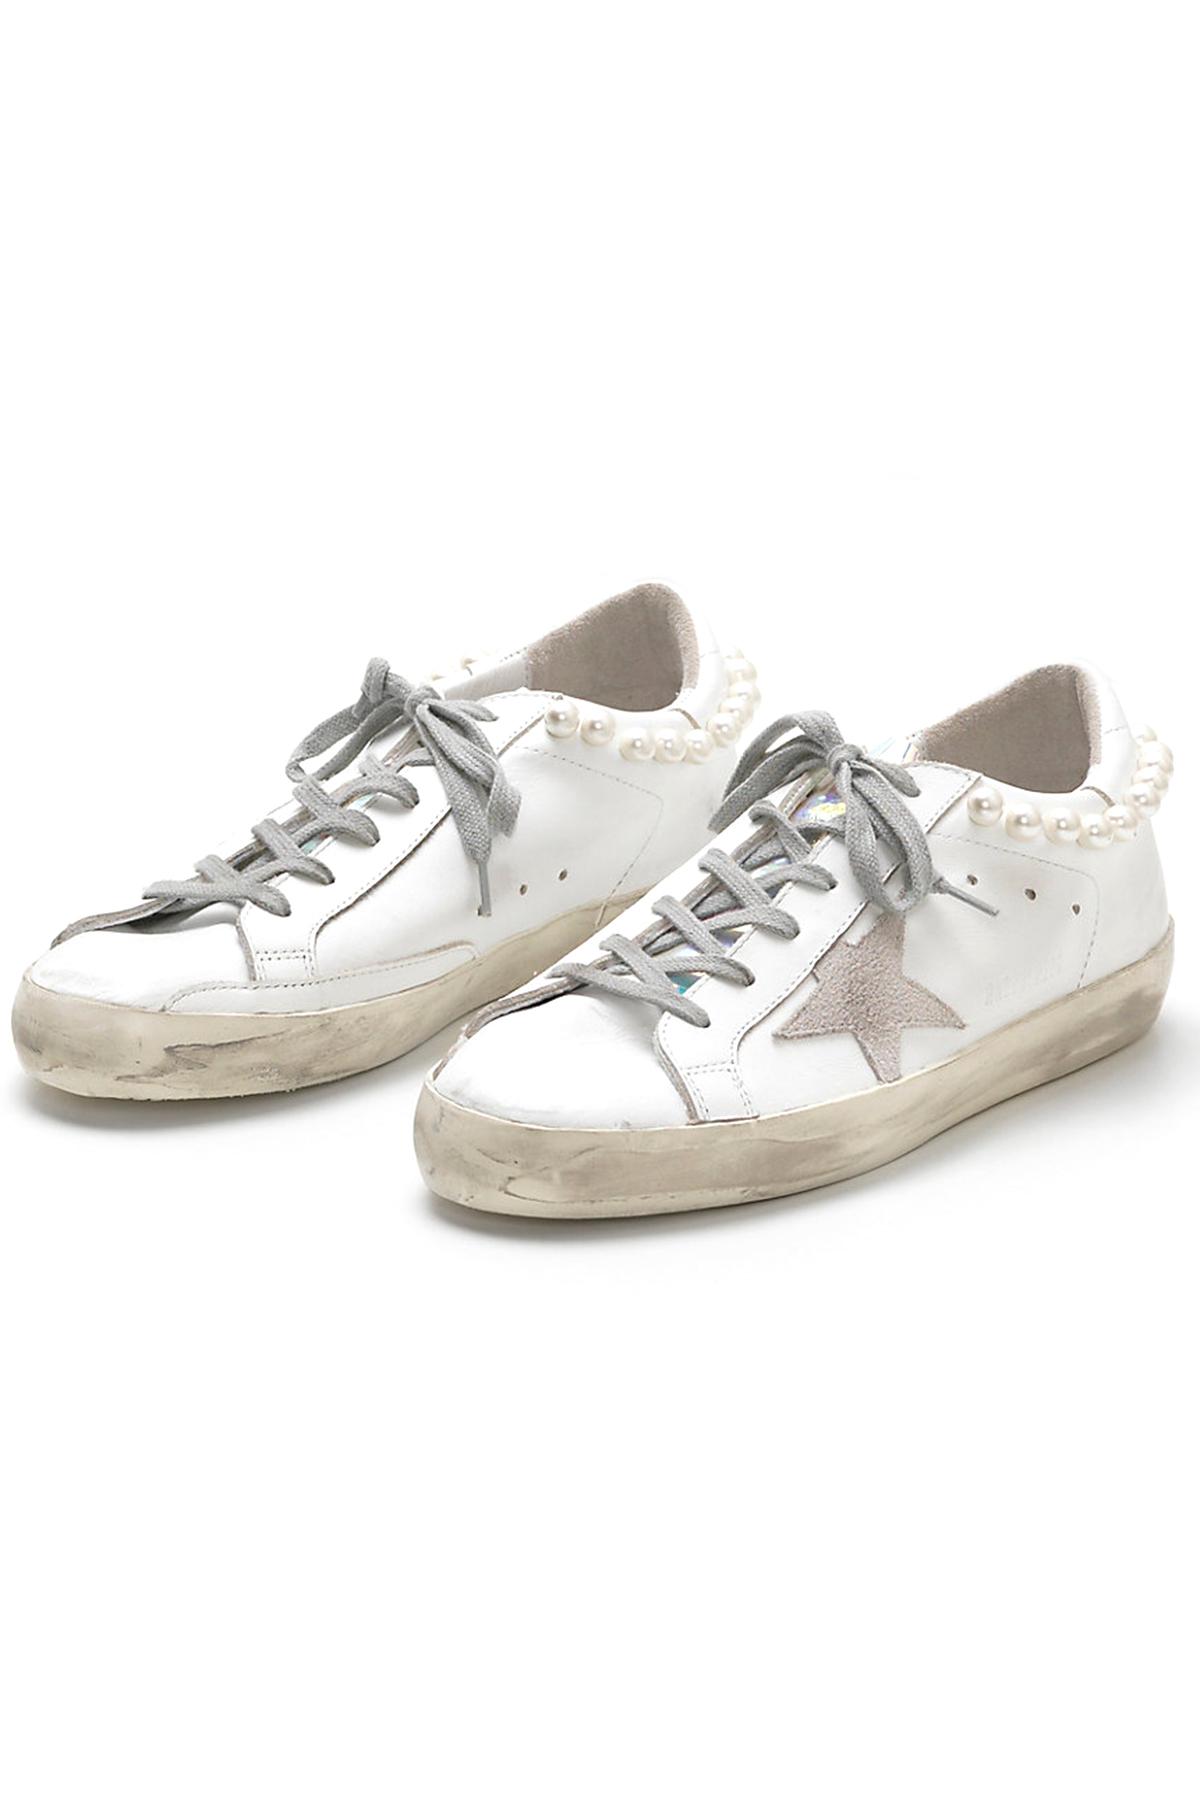 Golden Goose Deluxe Brand Leather Superstar Sneaker In Pearl White ...